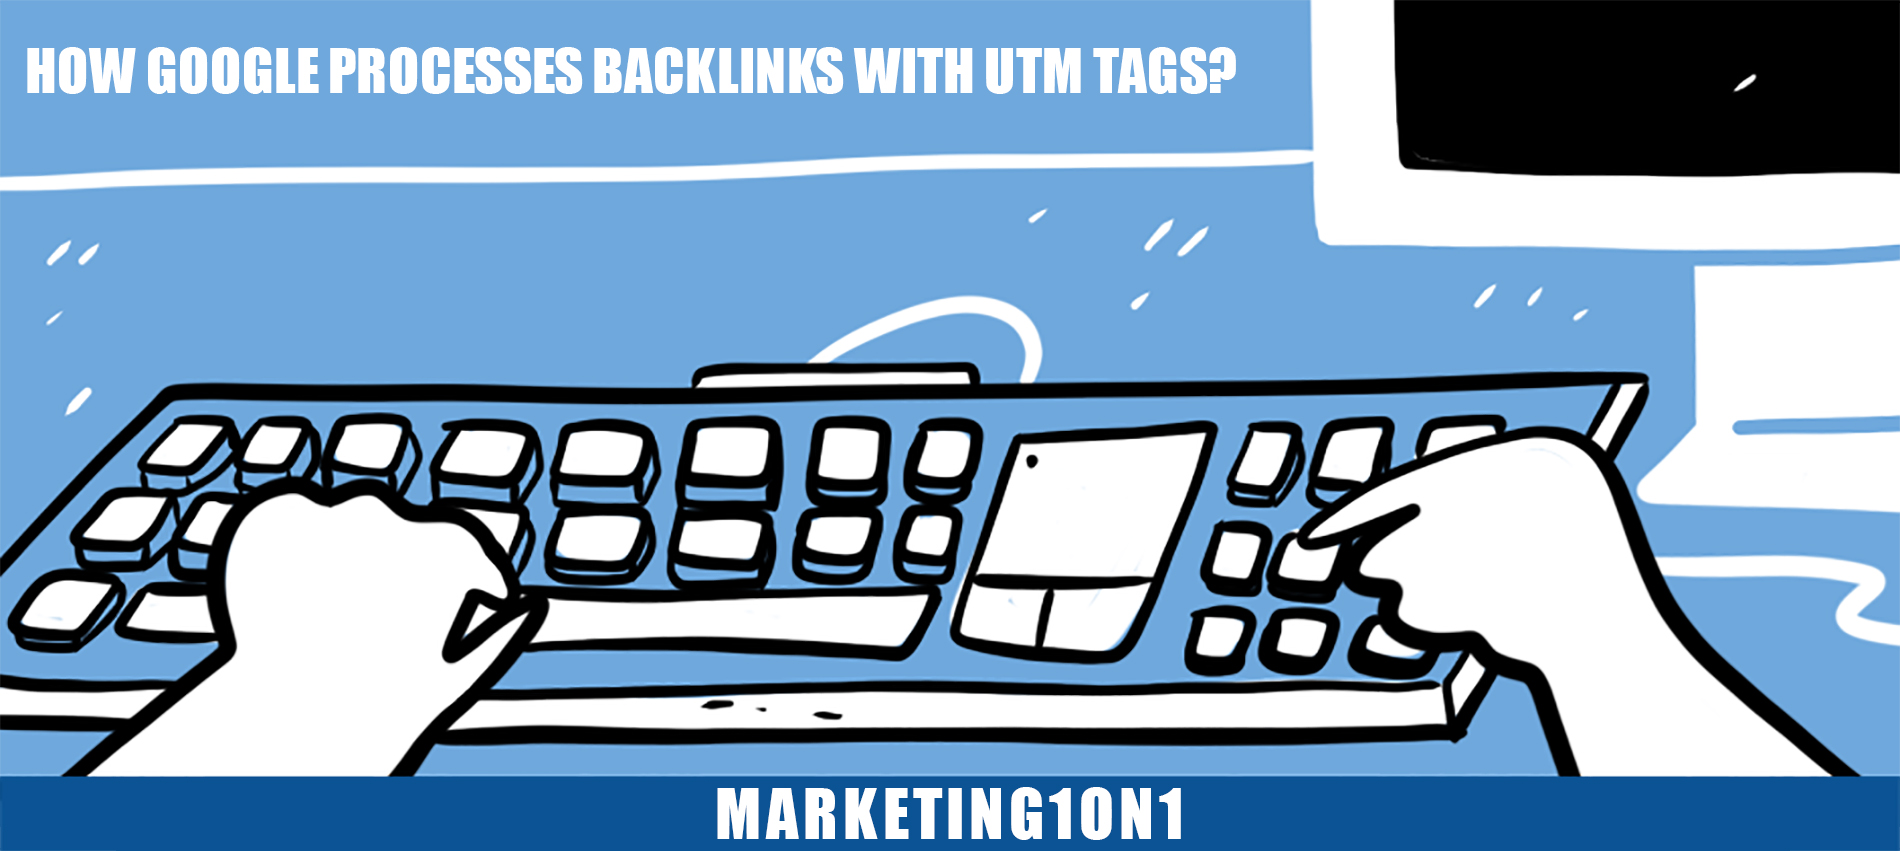 How google processes backlinks with UTM tags?